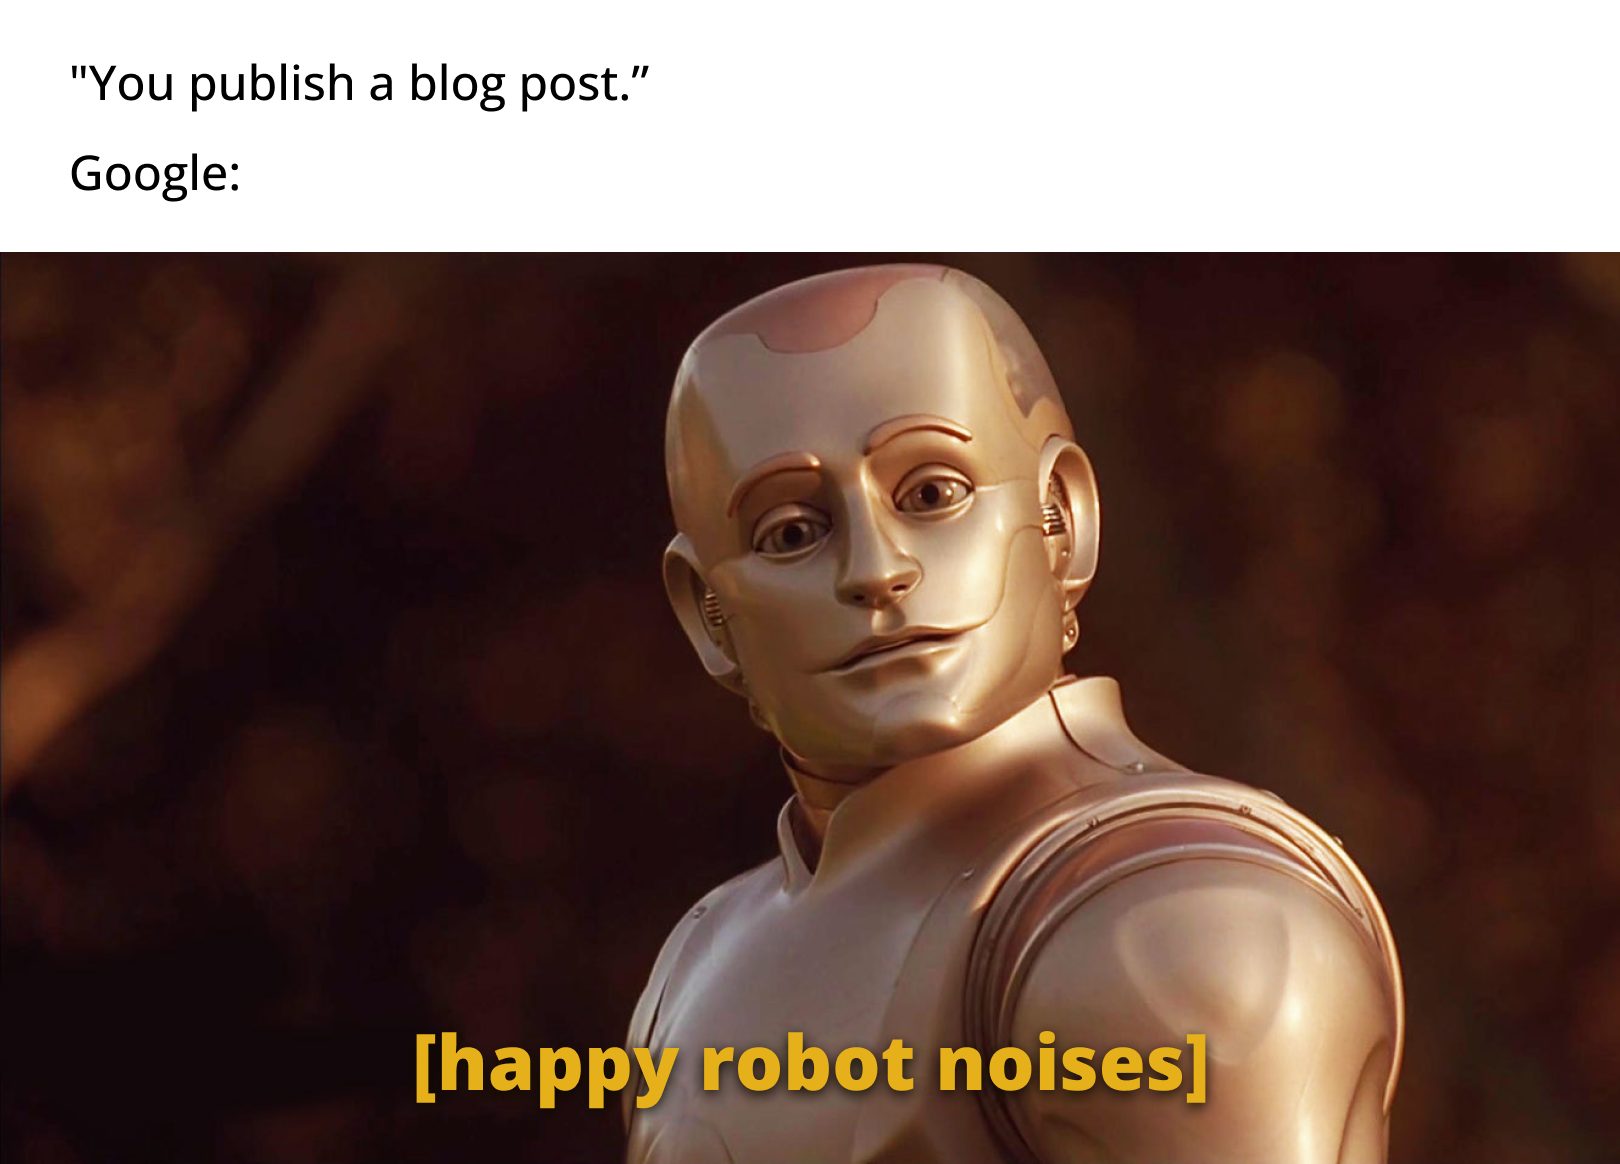 All About Making the Robots Happy